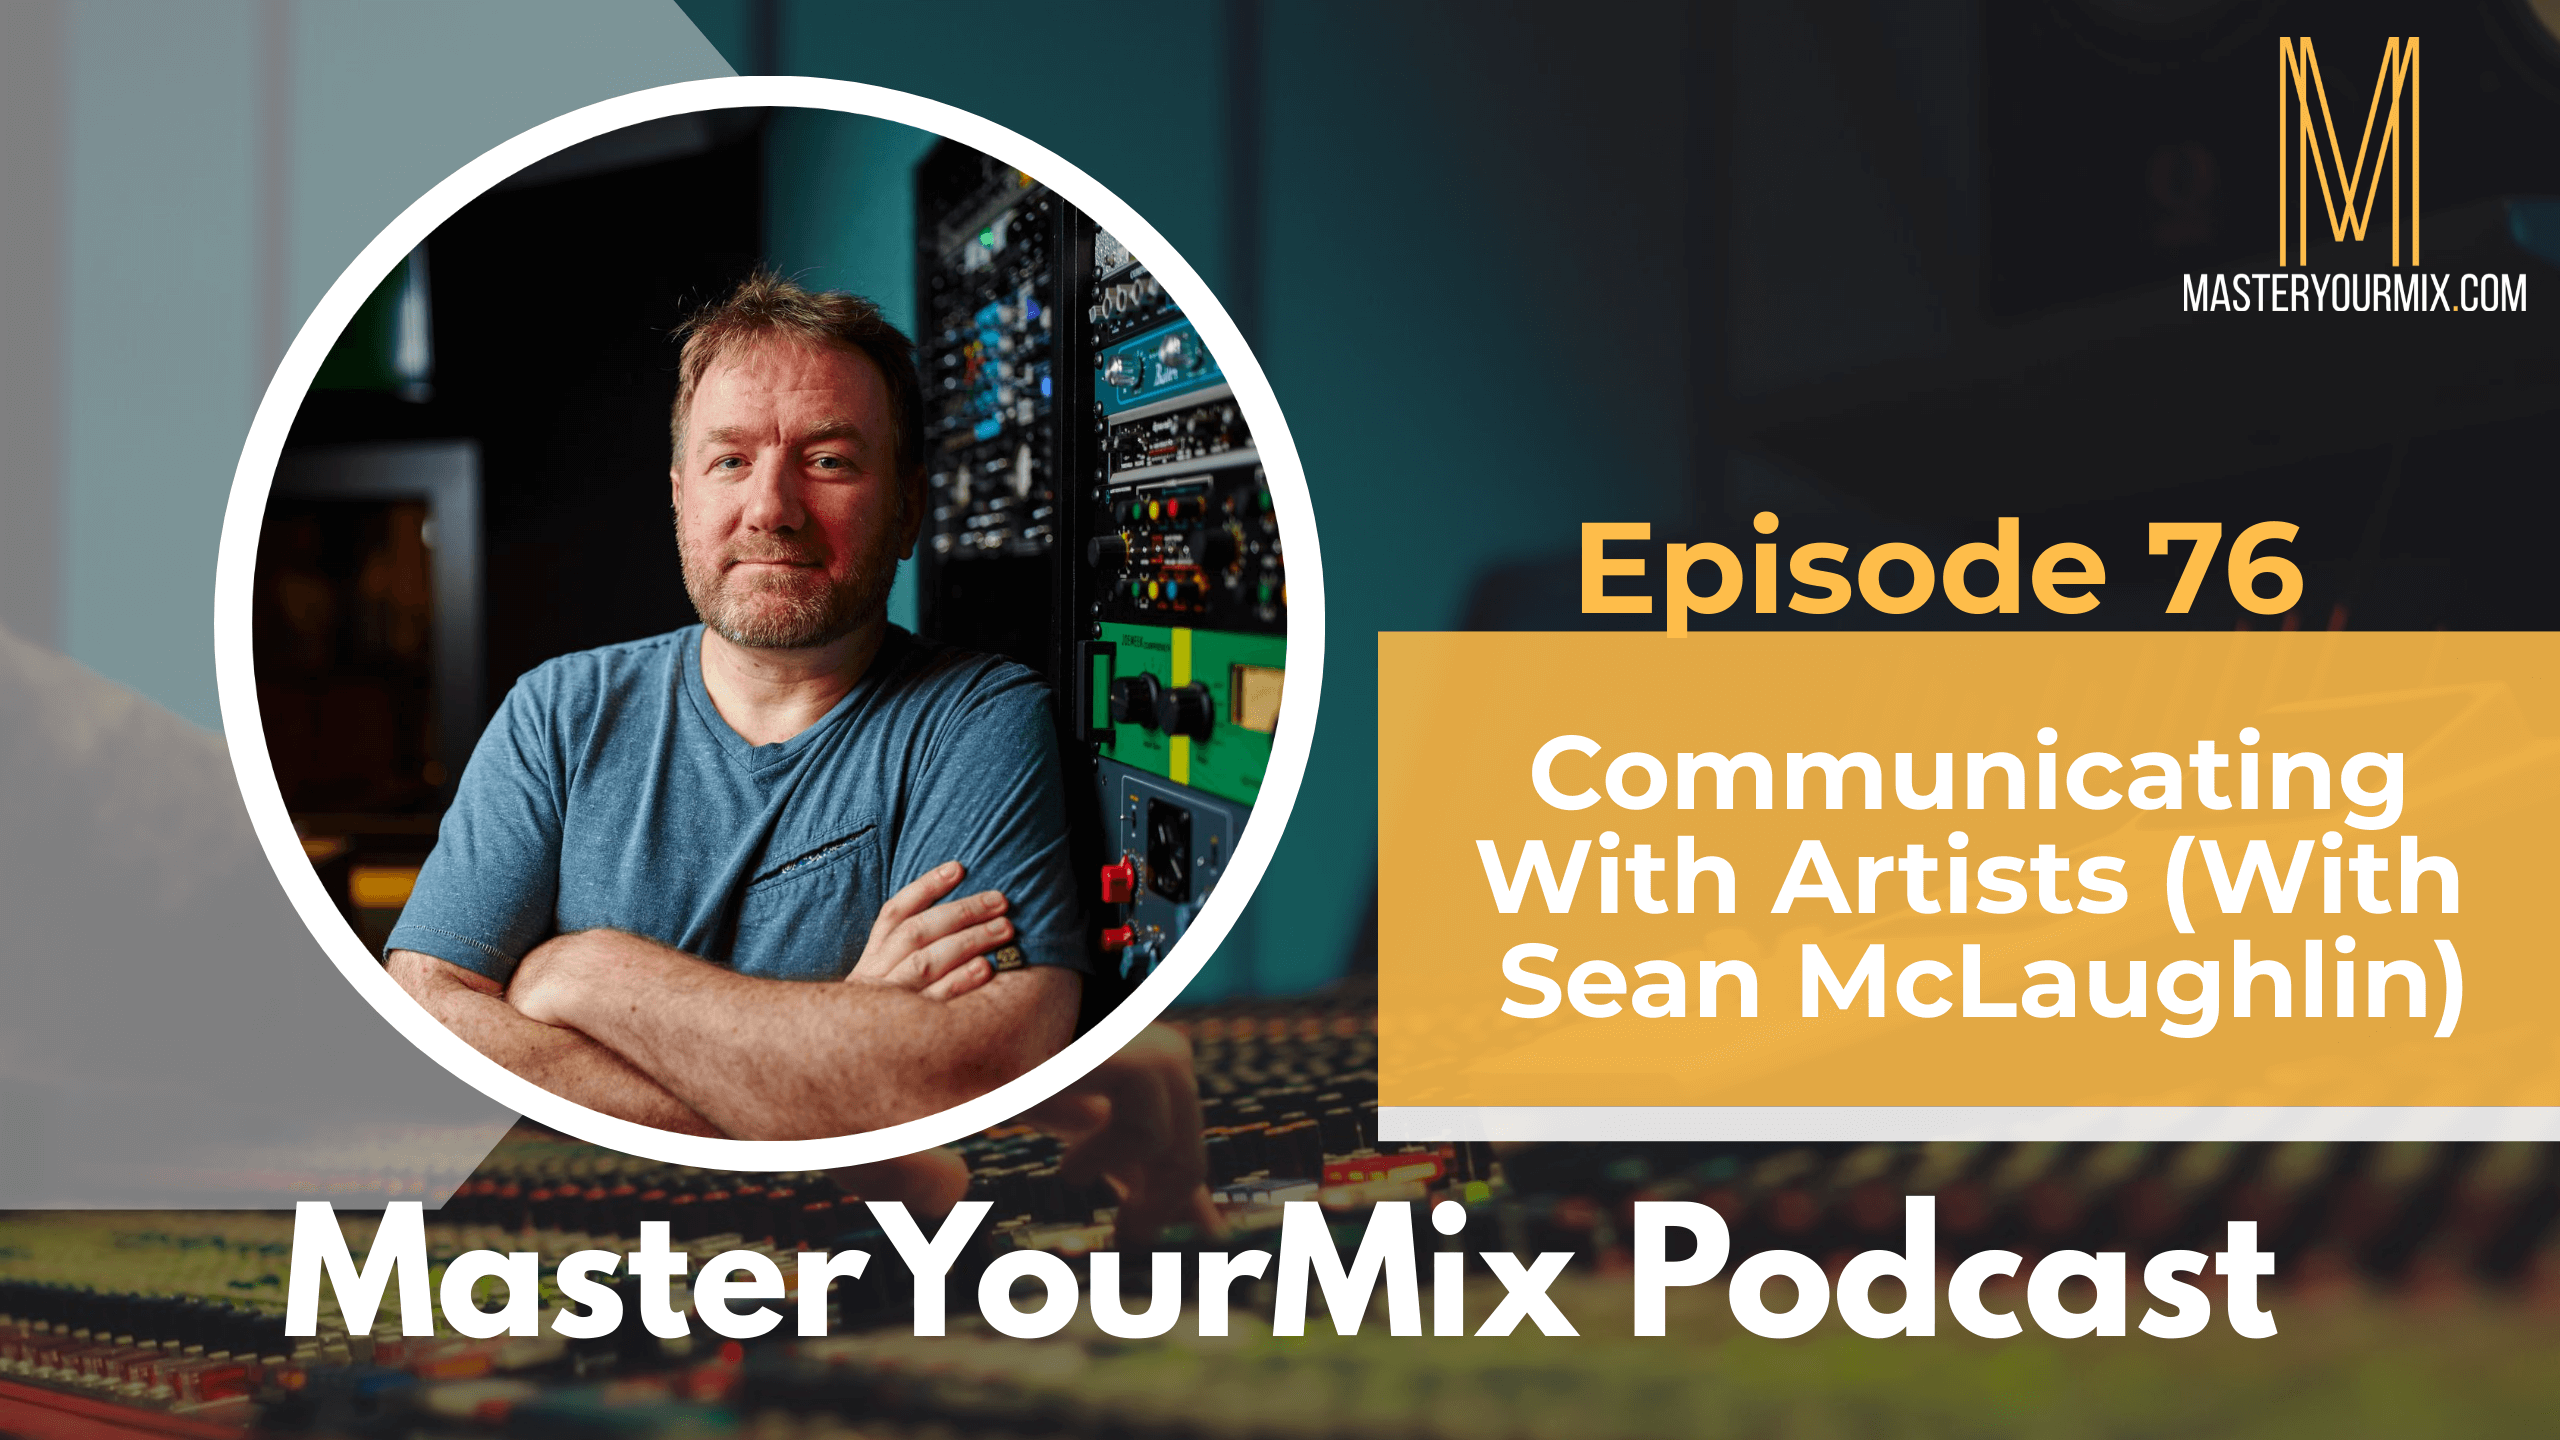 master your mix podcast, ep 76 sean mclaughlin